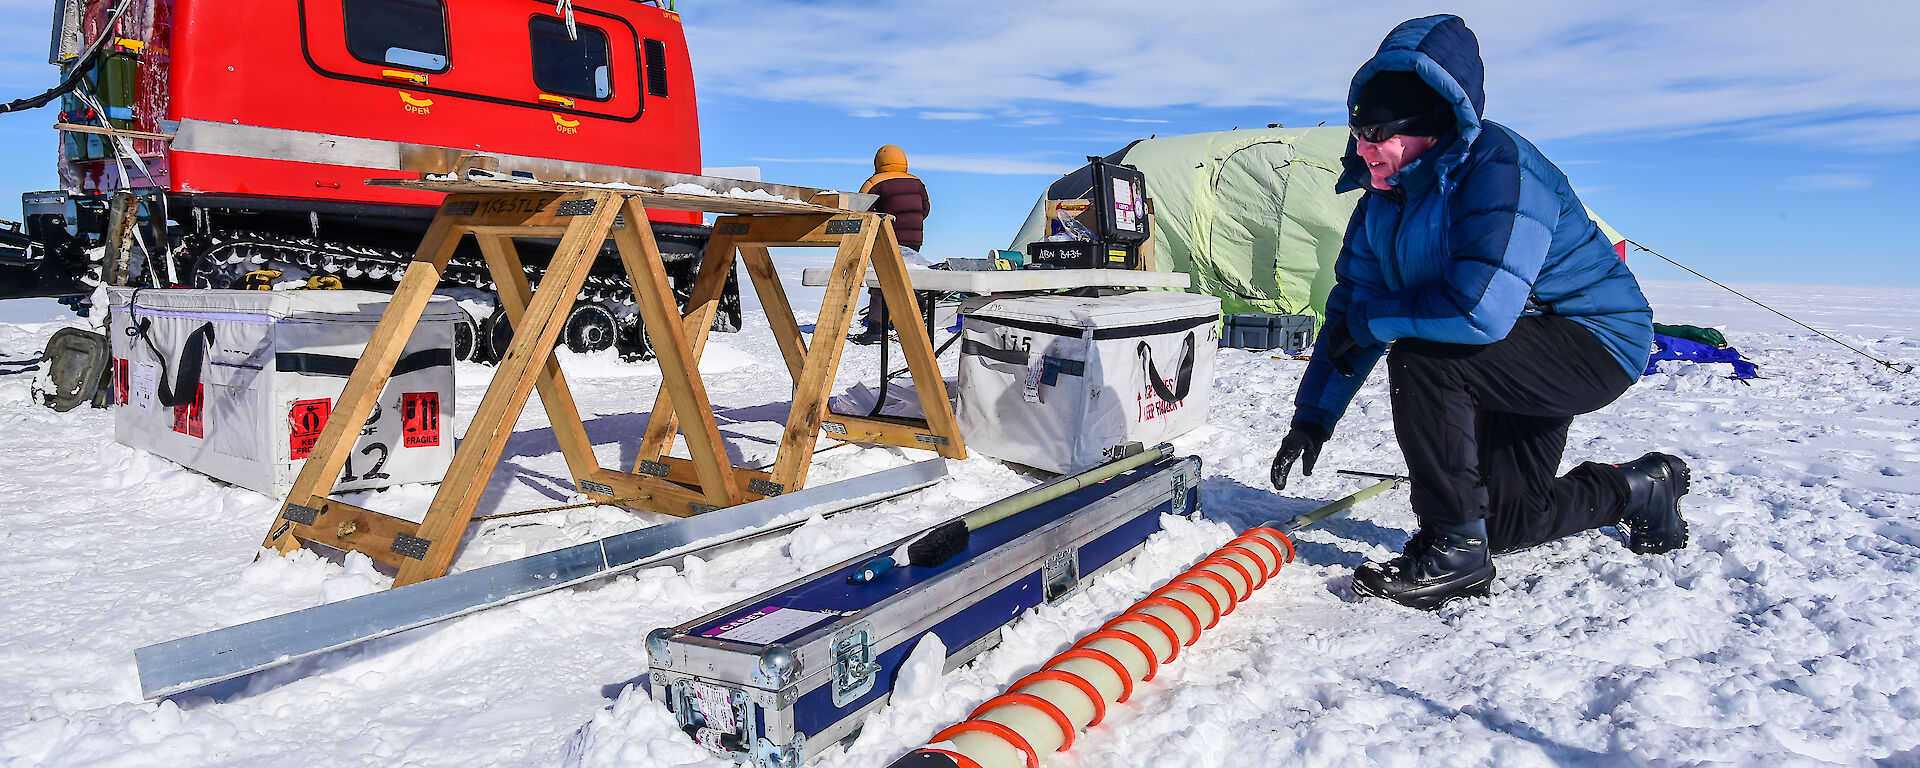 A scientist extracts ice from the ice core drill, with the campsite and Hägglunds in the background.